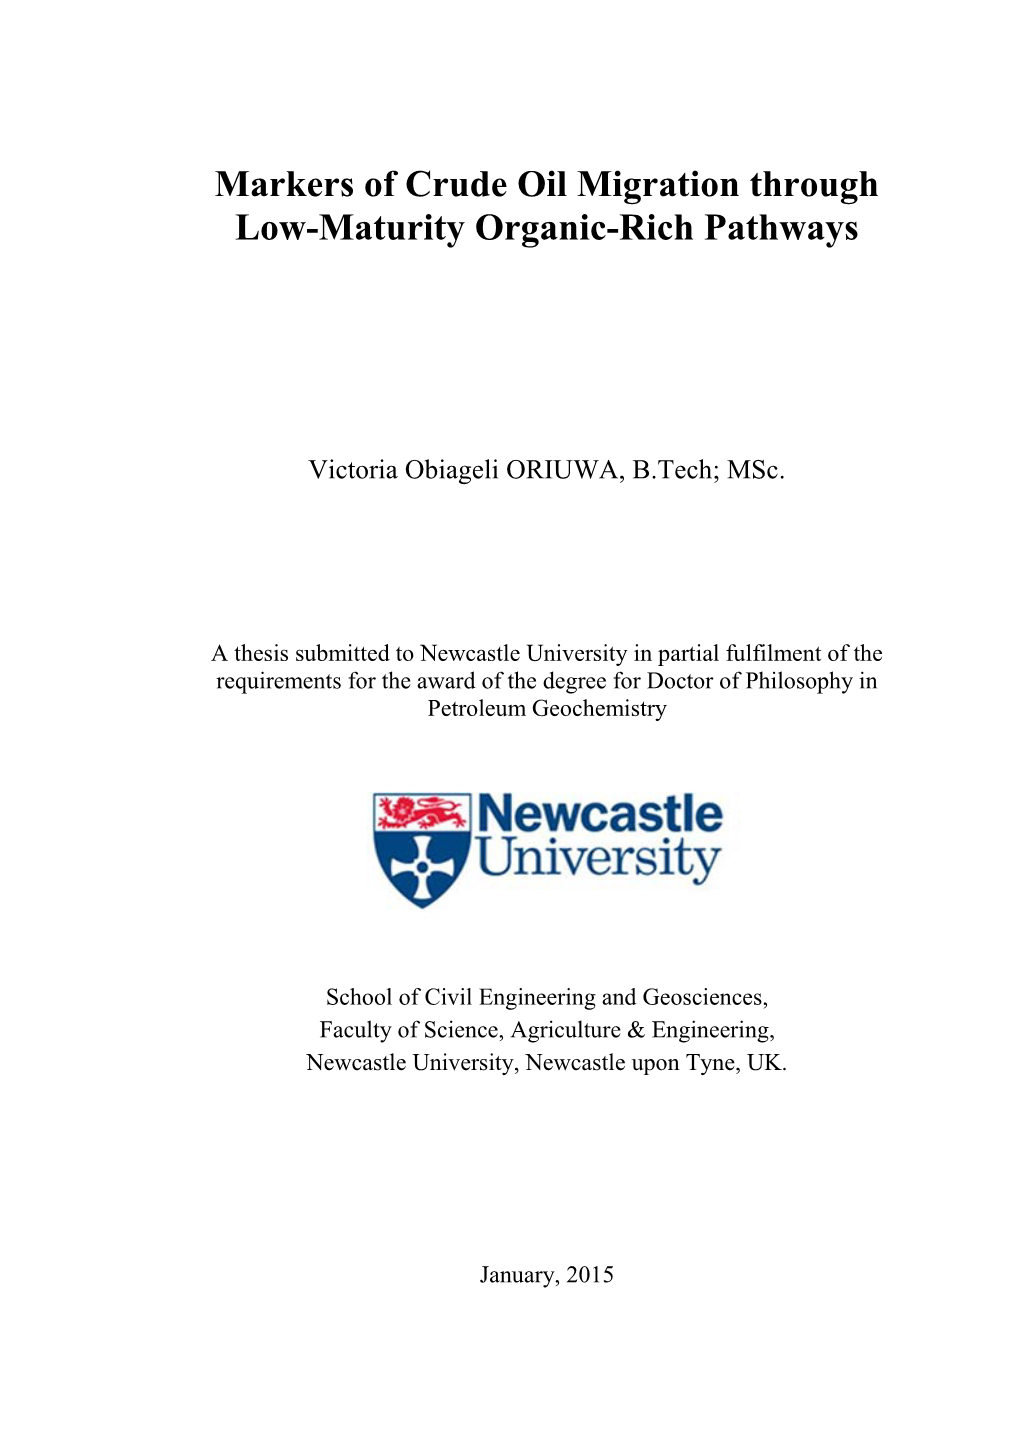 Markers of Crude Oil Migration Through Low-Maturity Organic-Rich Pathways